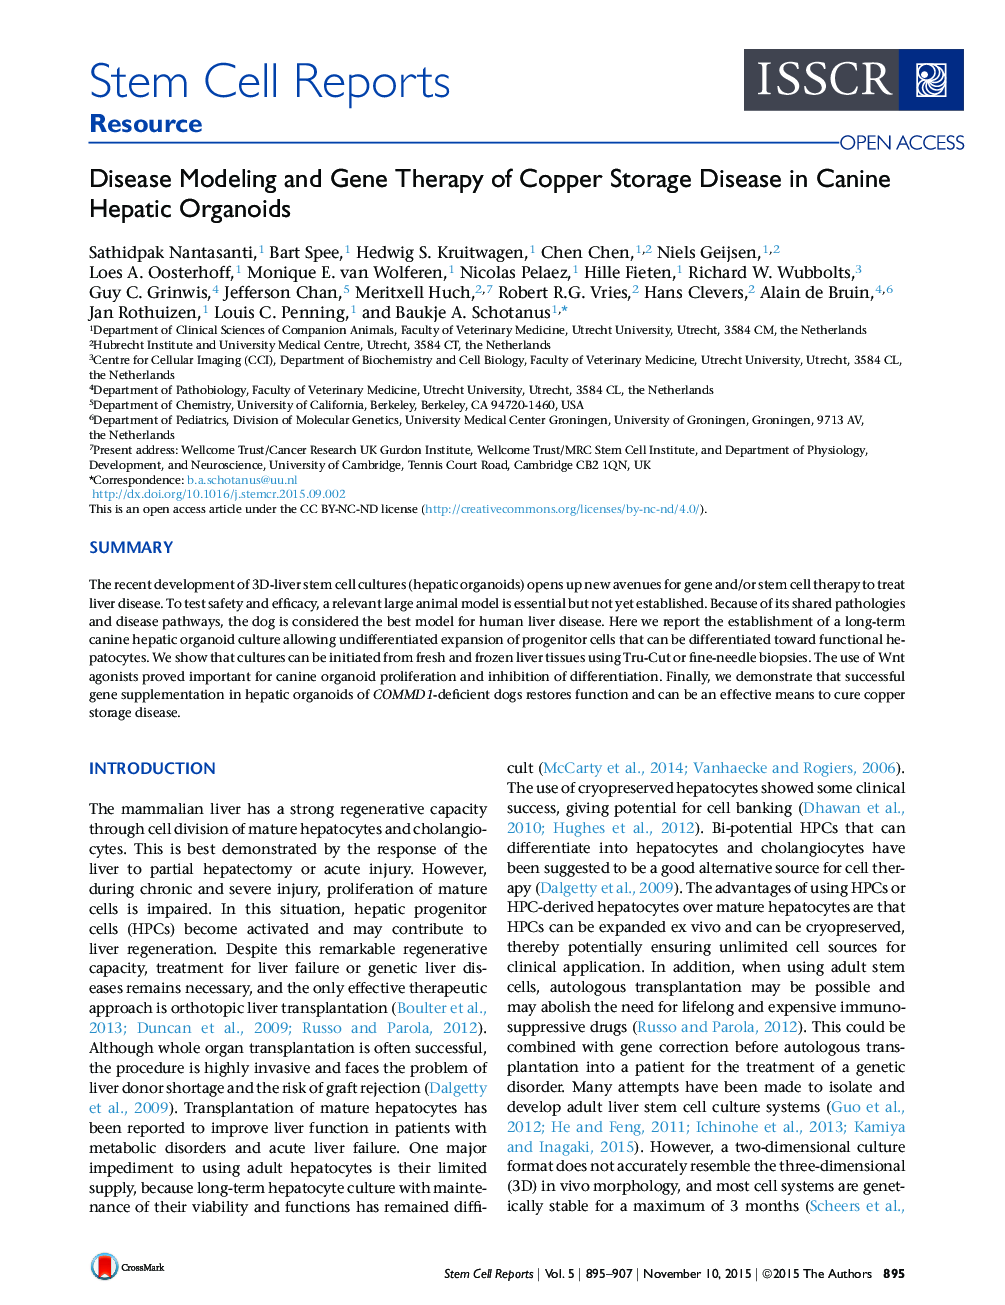 Disease Modeling and Gene Therapy of Copper Storage Disease in Canine Hepatic Organoids 